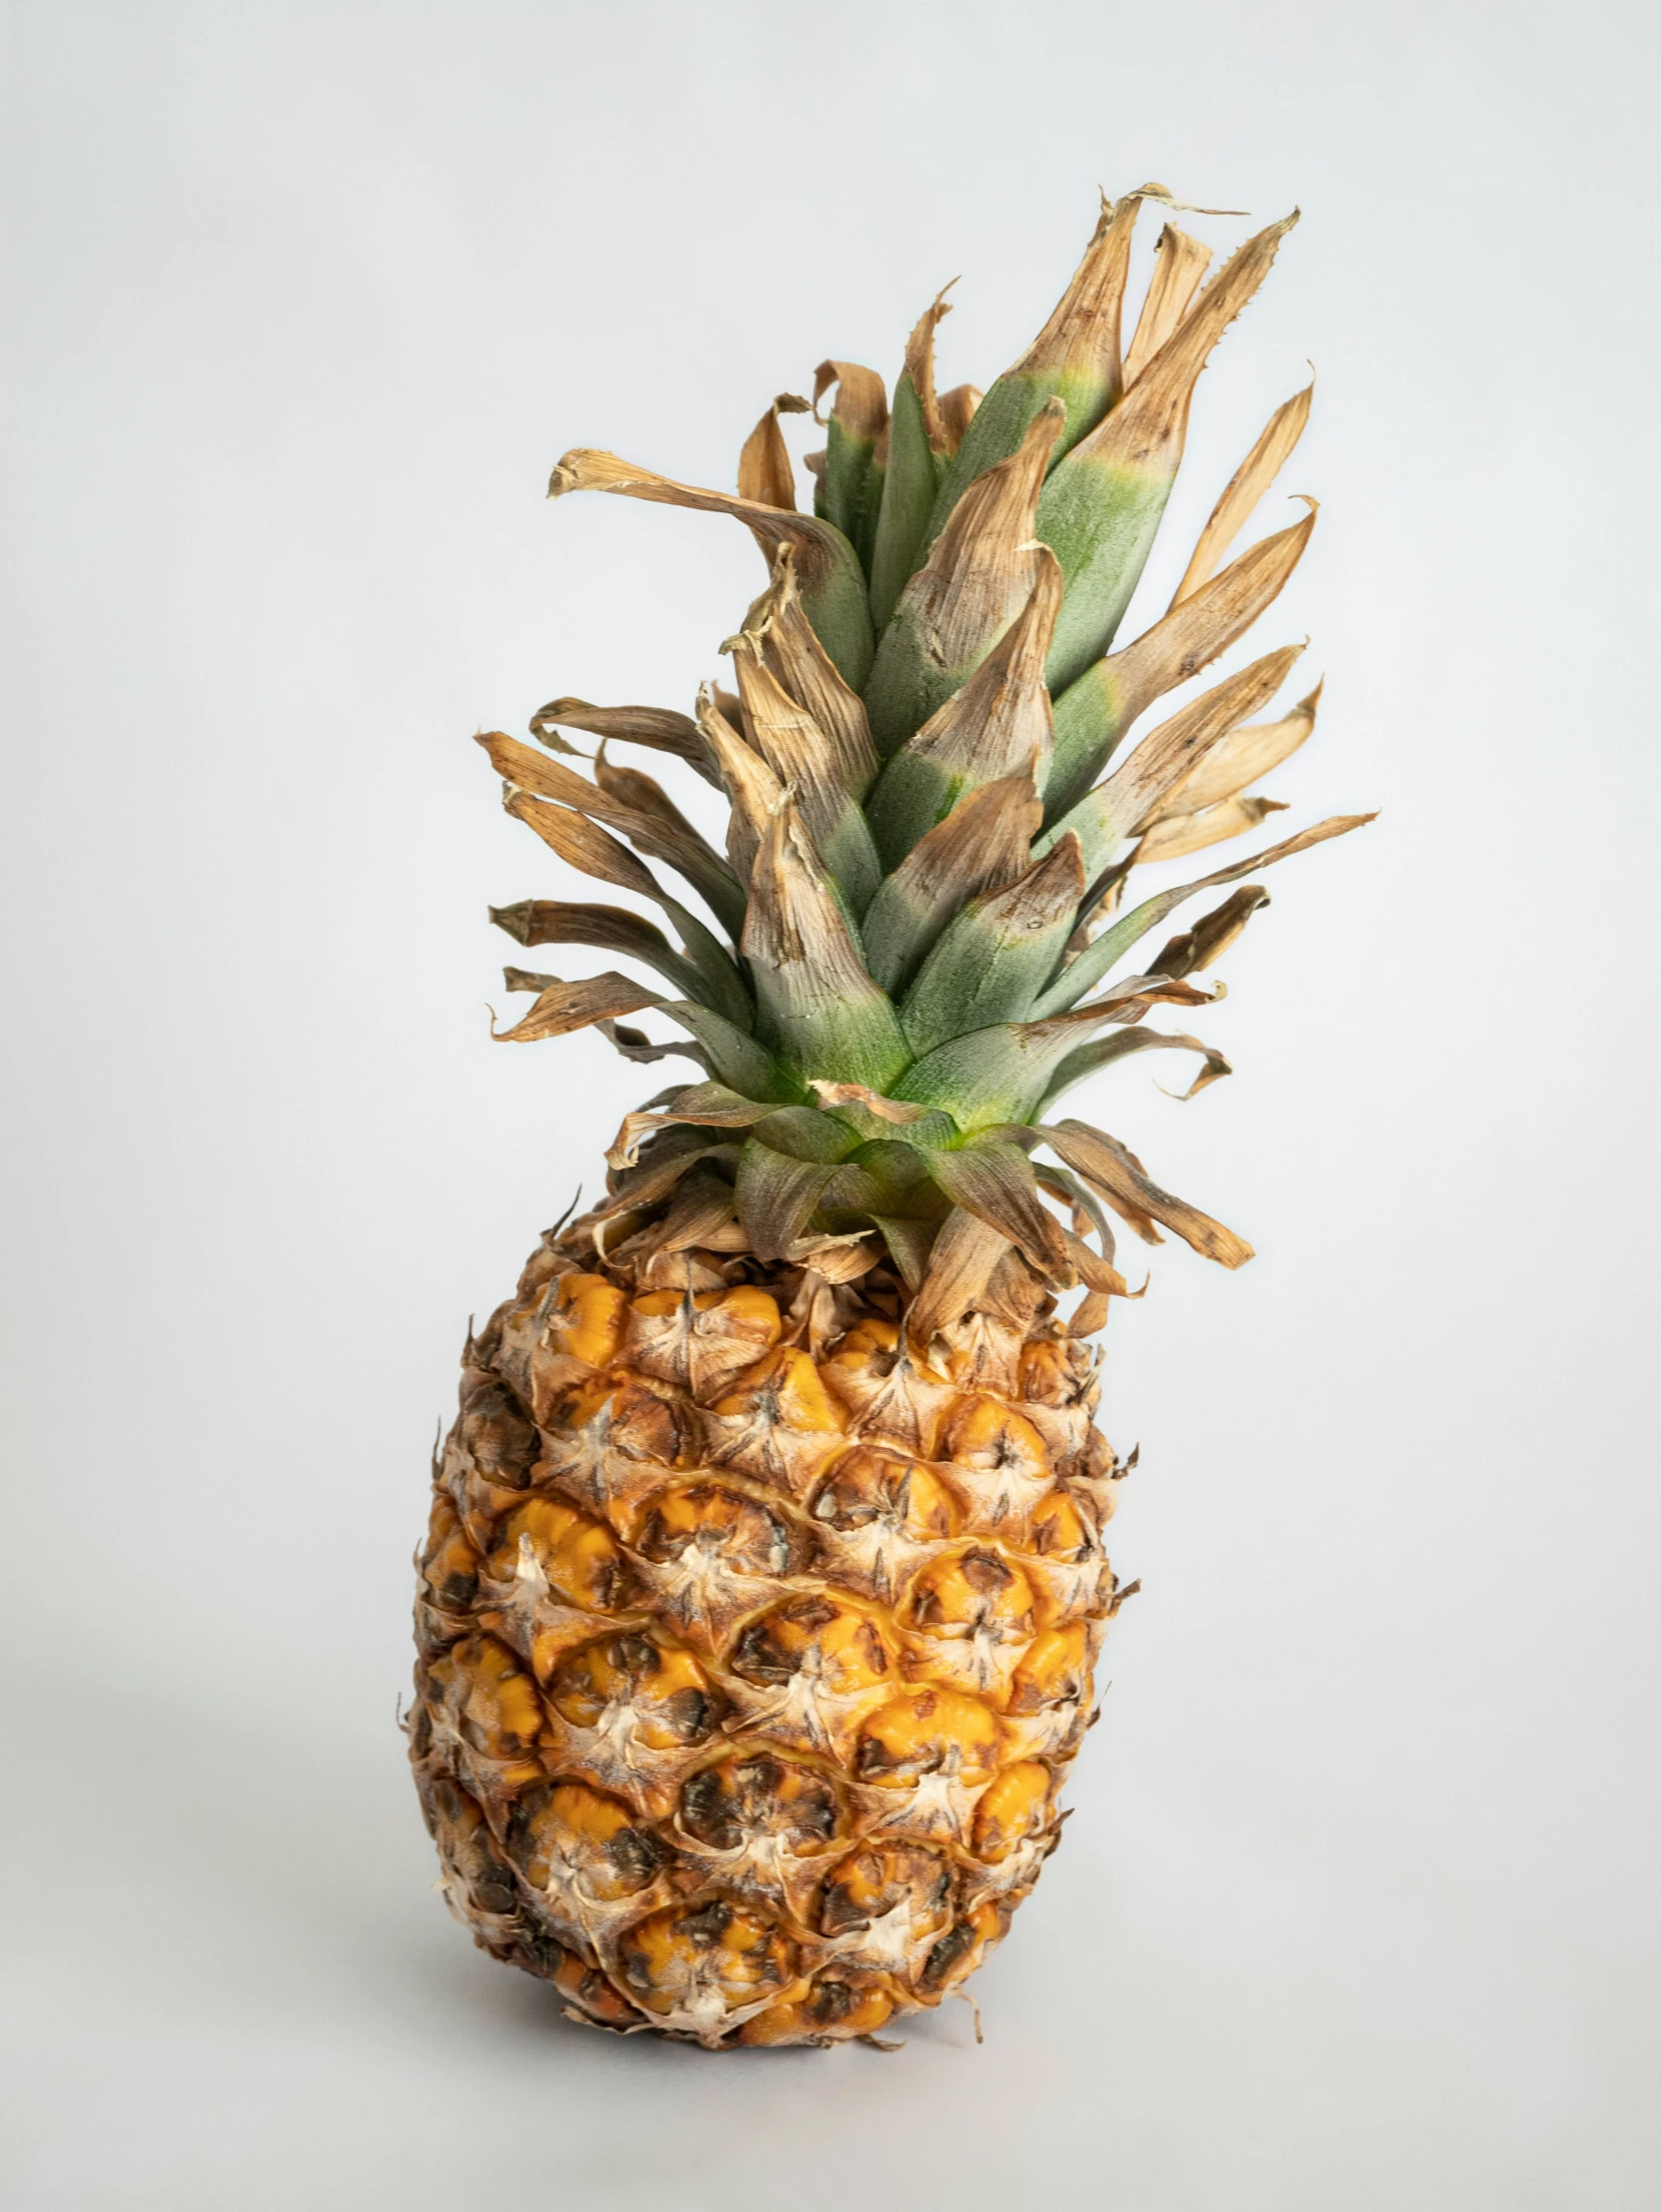 a pineapple standing upright against a gray background